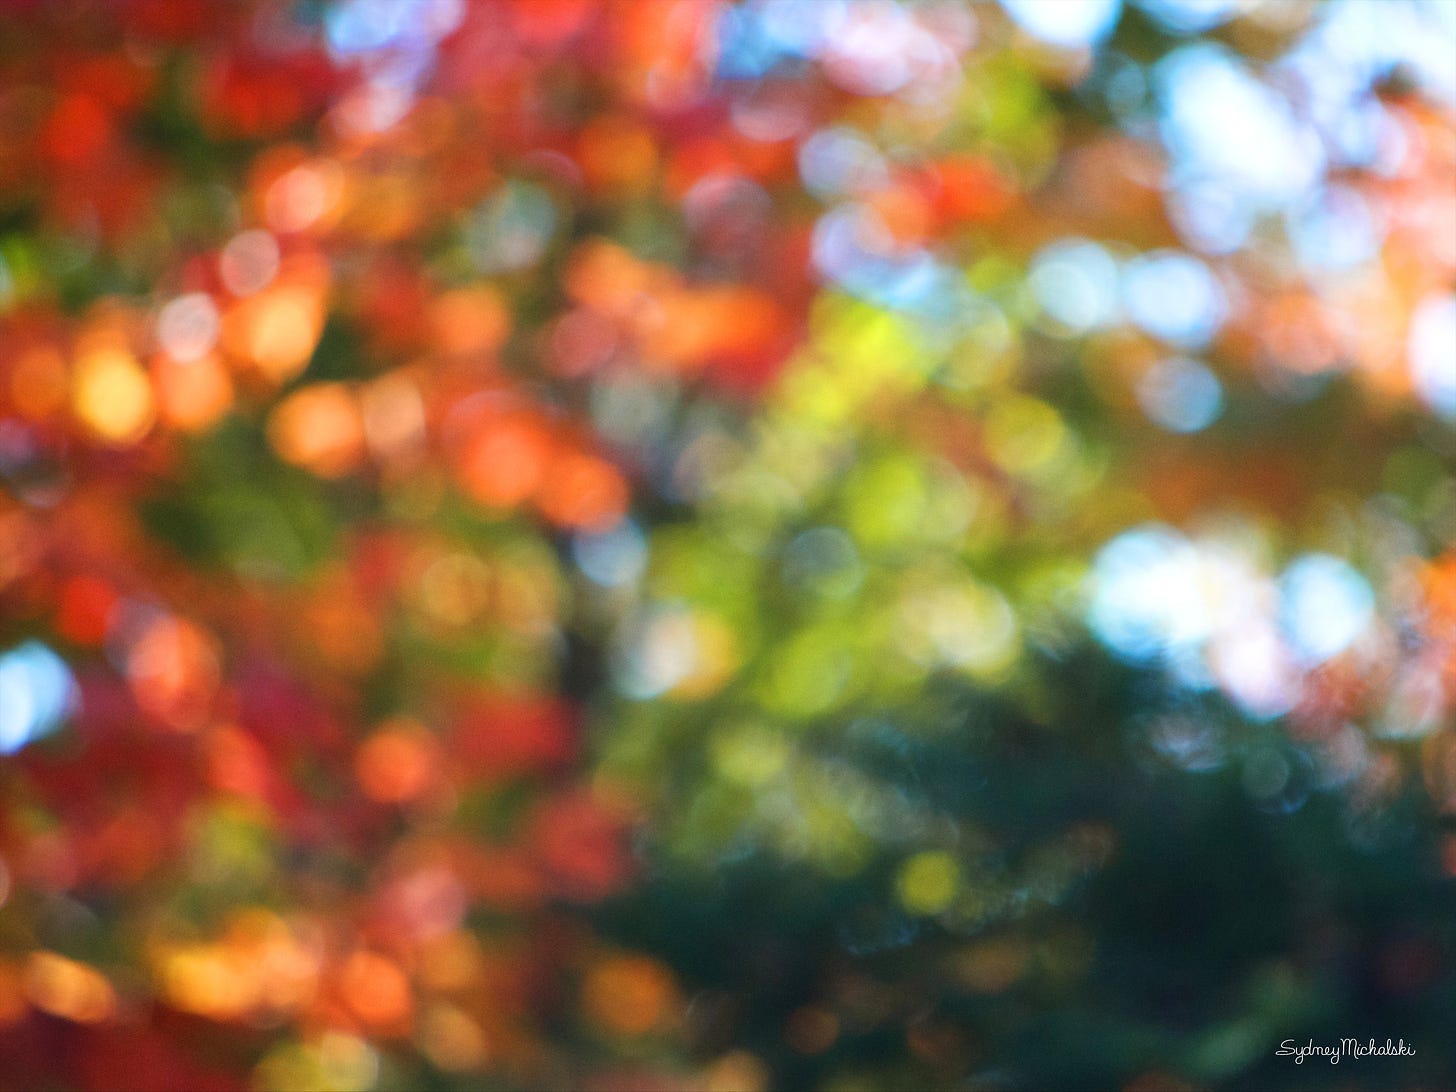 An abstract image uses a soft focus on autumn leaves, in red, orange, yellow, and evergreen.